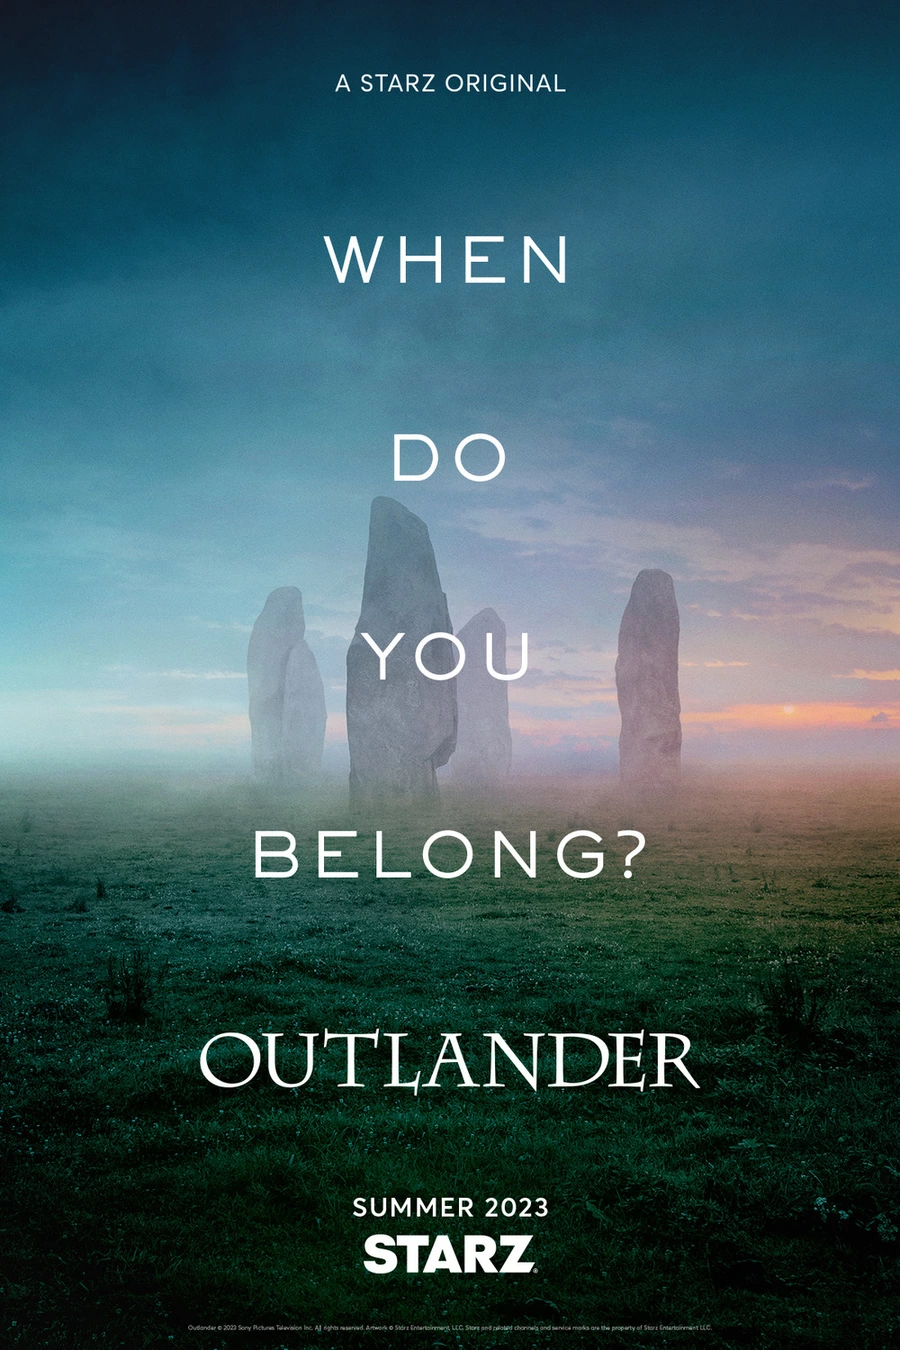 5727 poster for season 7 of the historical fiction melodrama outlander which will premiere in sum